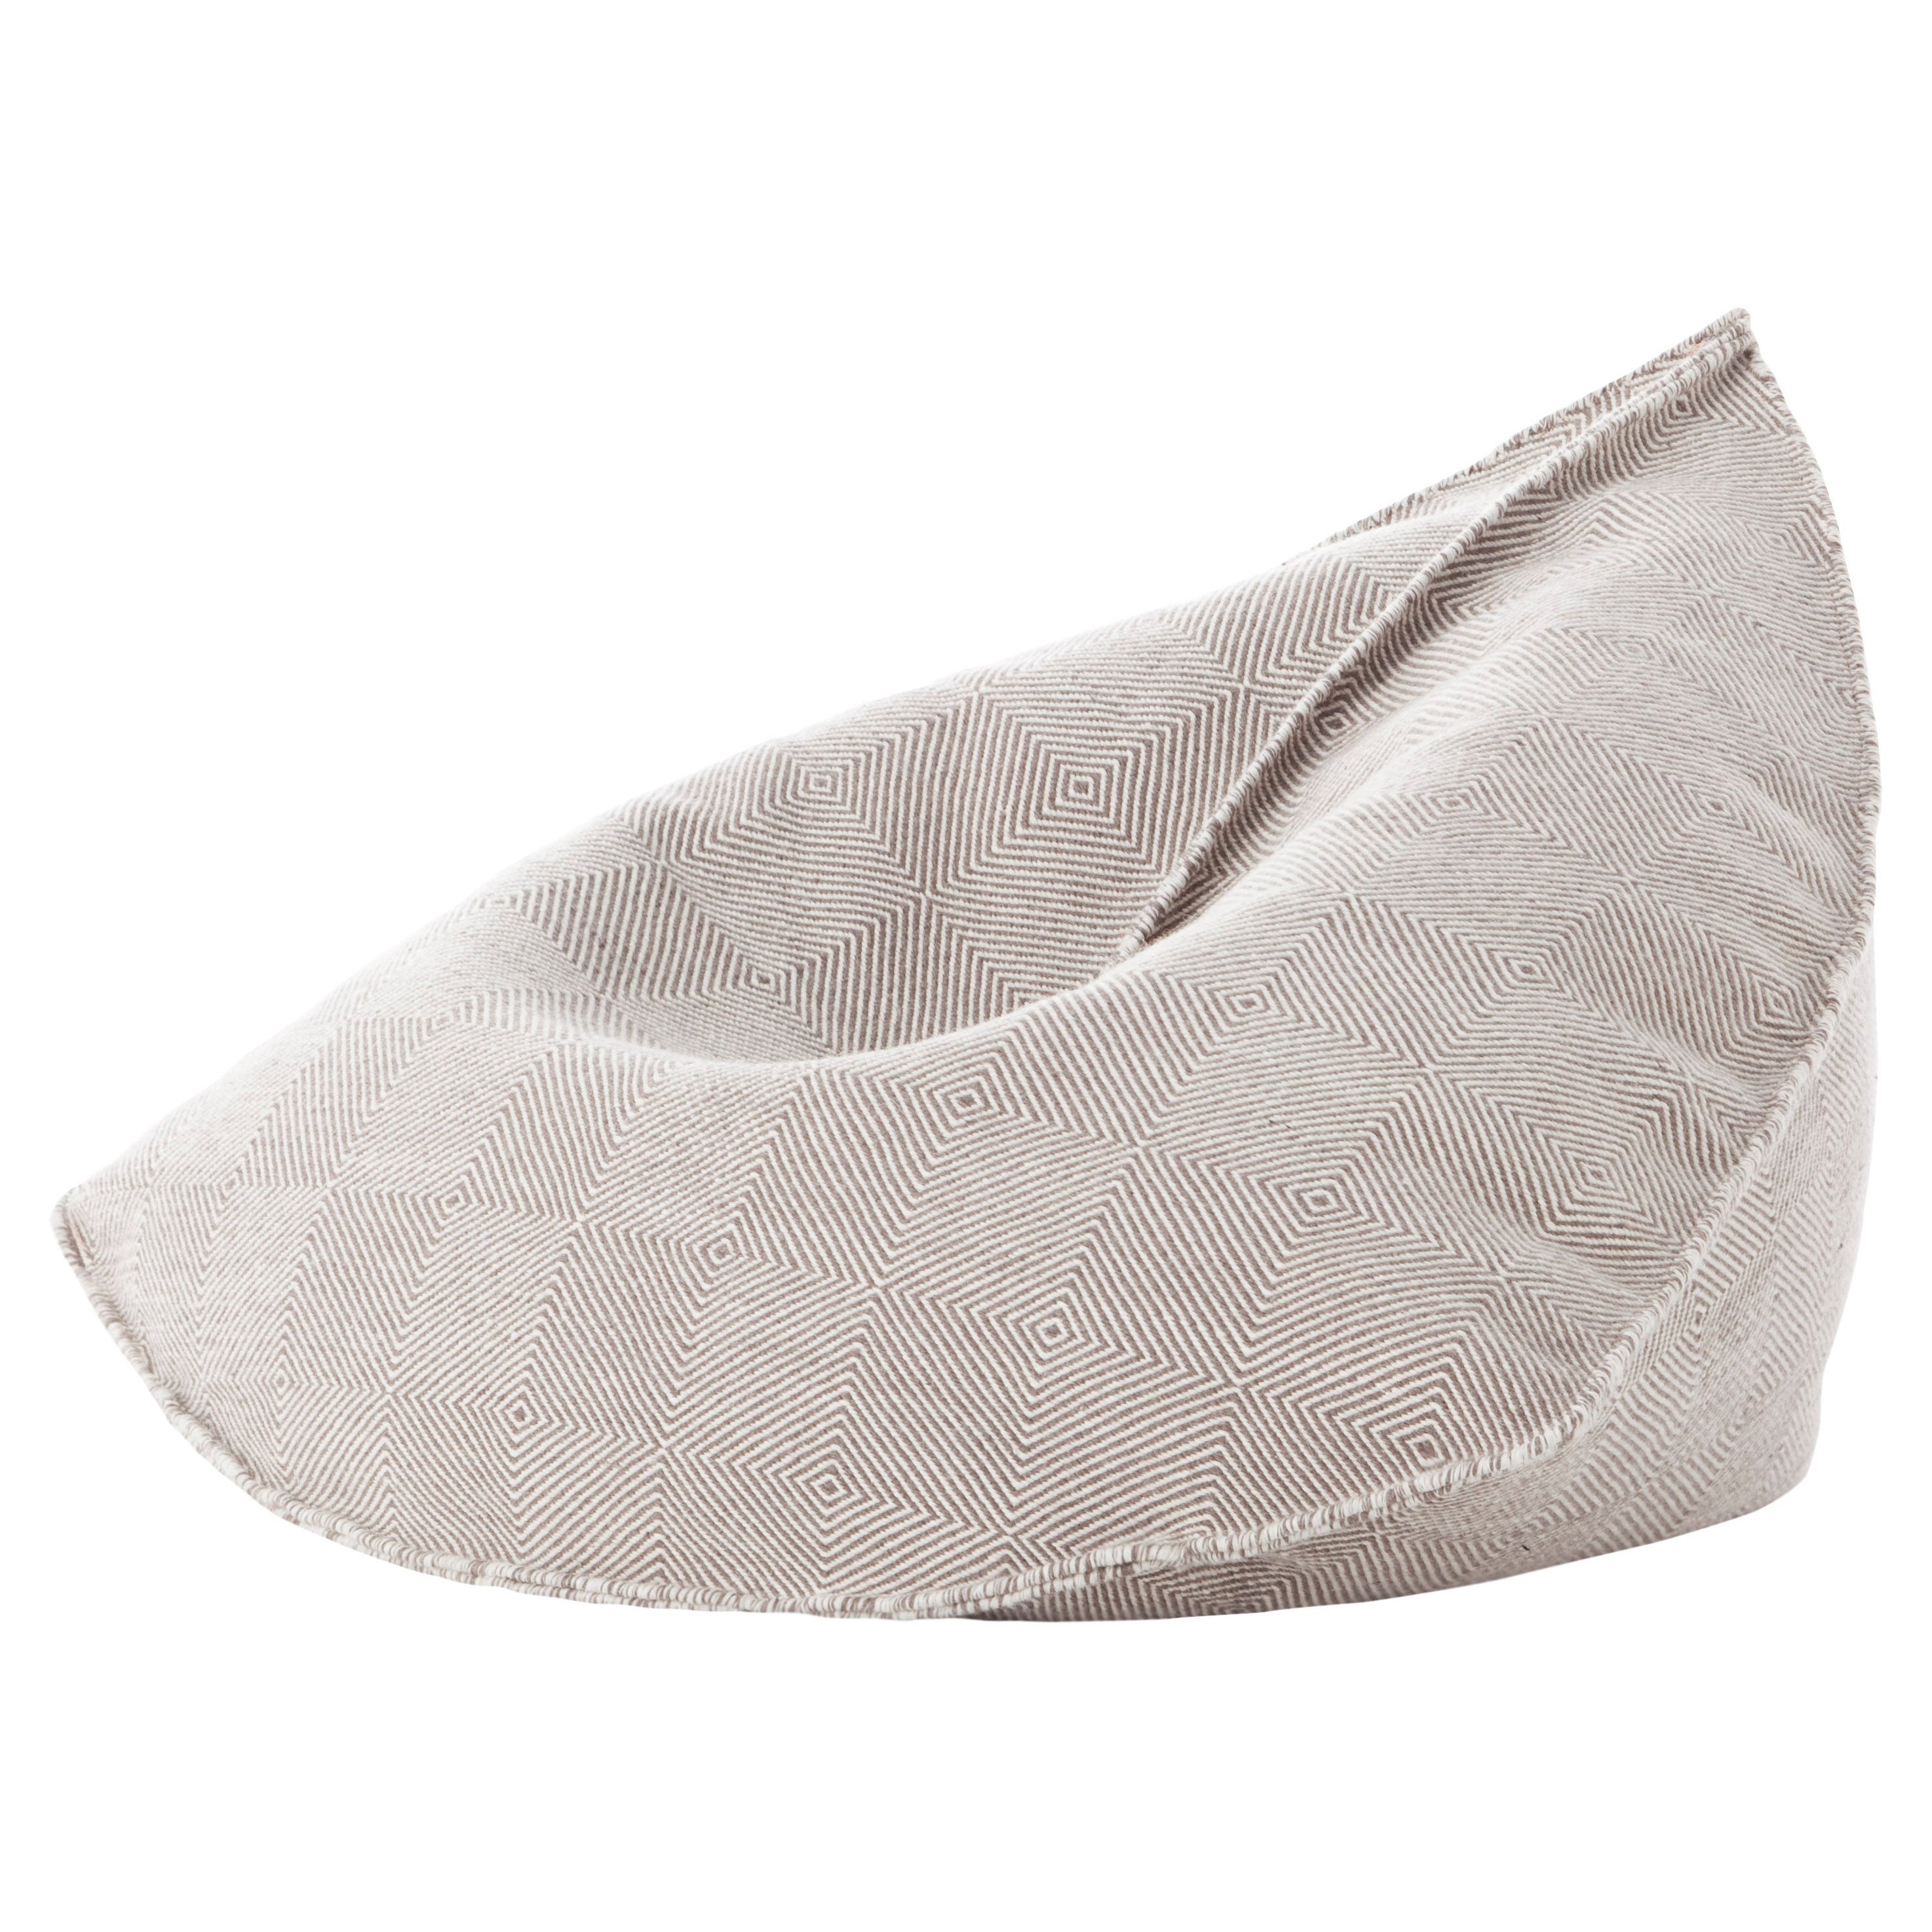 GAN Spaces Sail Pouf in Taupe by Héctor Serrano For Sale